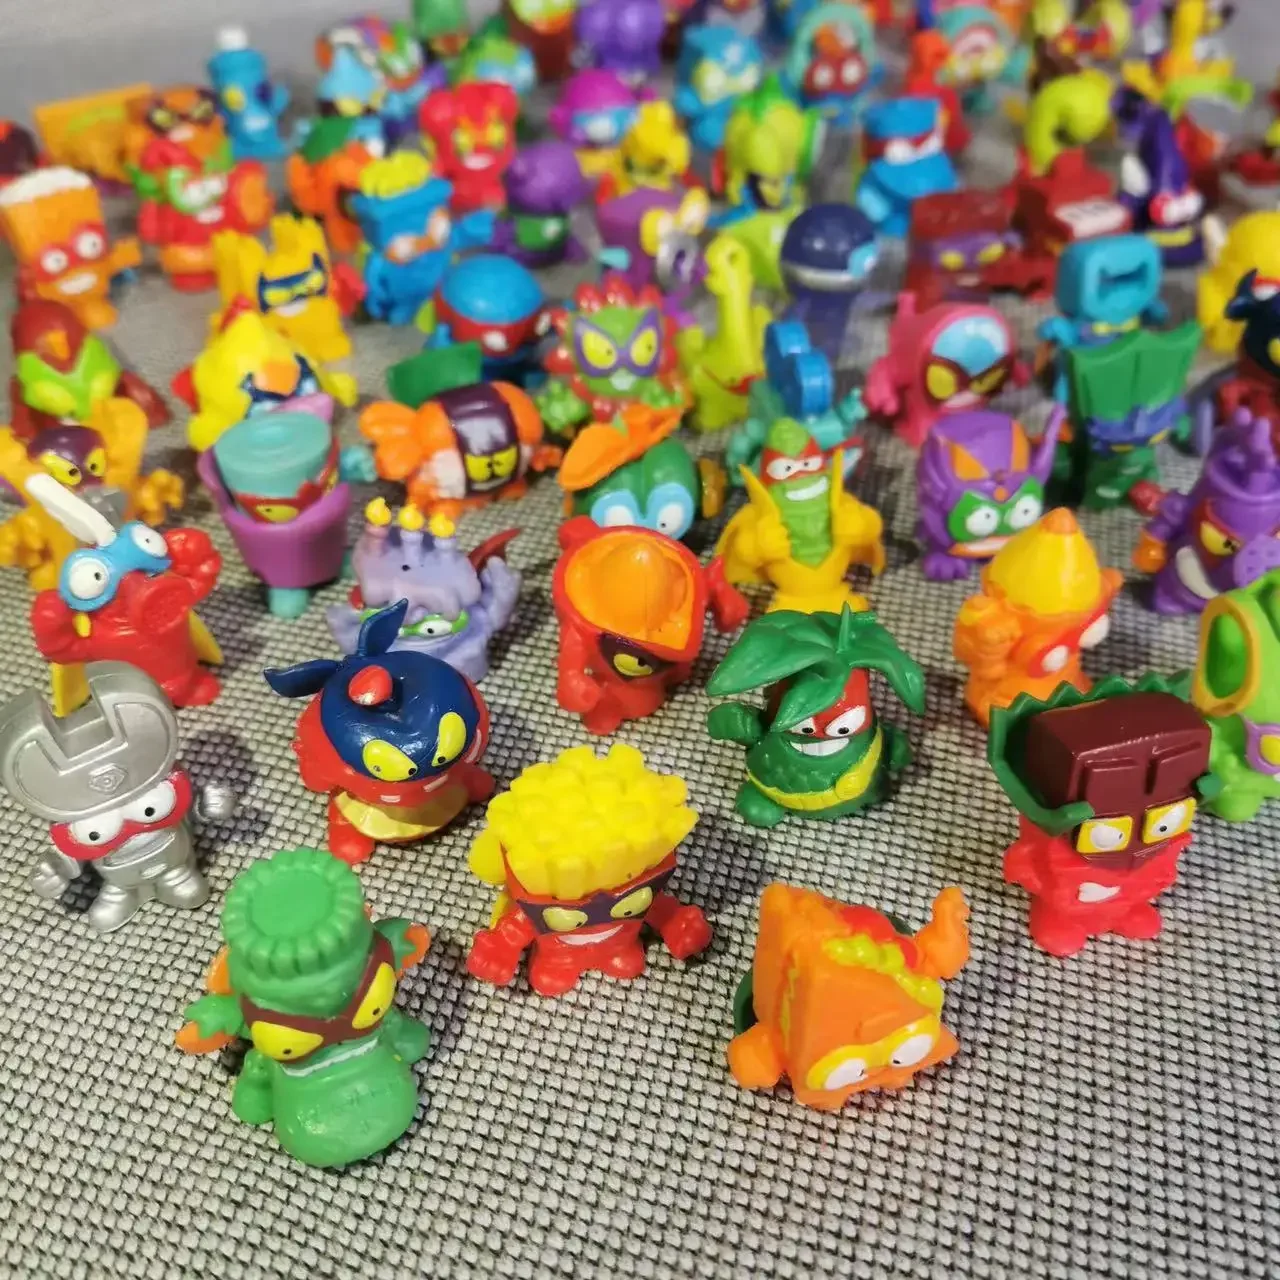 10-50pcs Superzings originali Superthings Action Figures 3CM Super Zings Garbage Trash Collection Toys Model for Kids Gifts